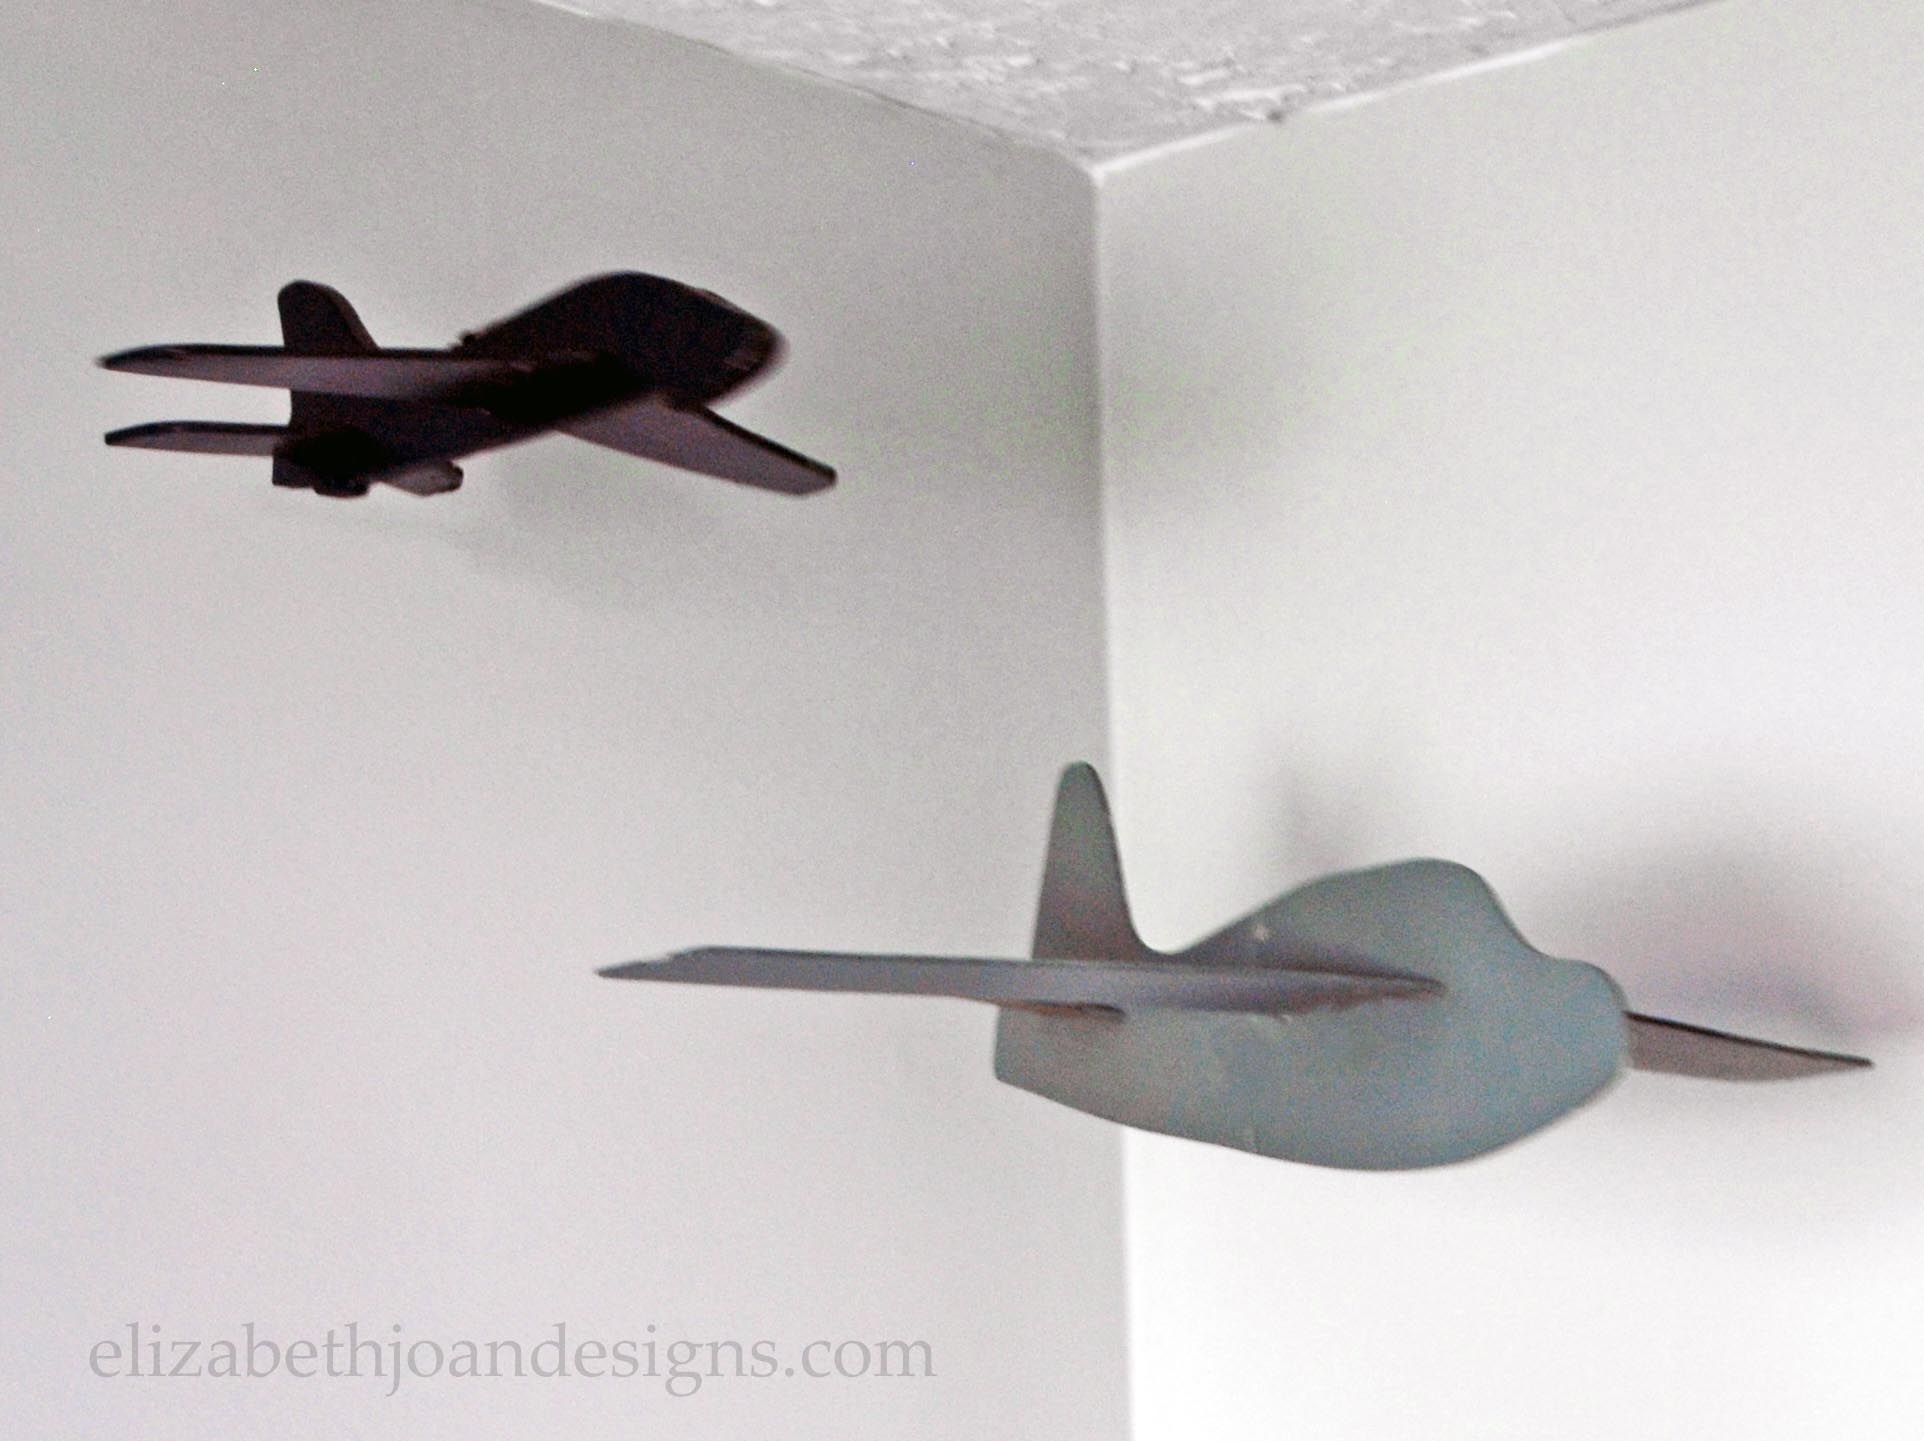 Super Cheap & Extremely Easy Hanging Airplane - ELIZABETH JOAN DESIGNS